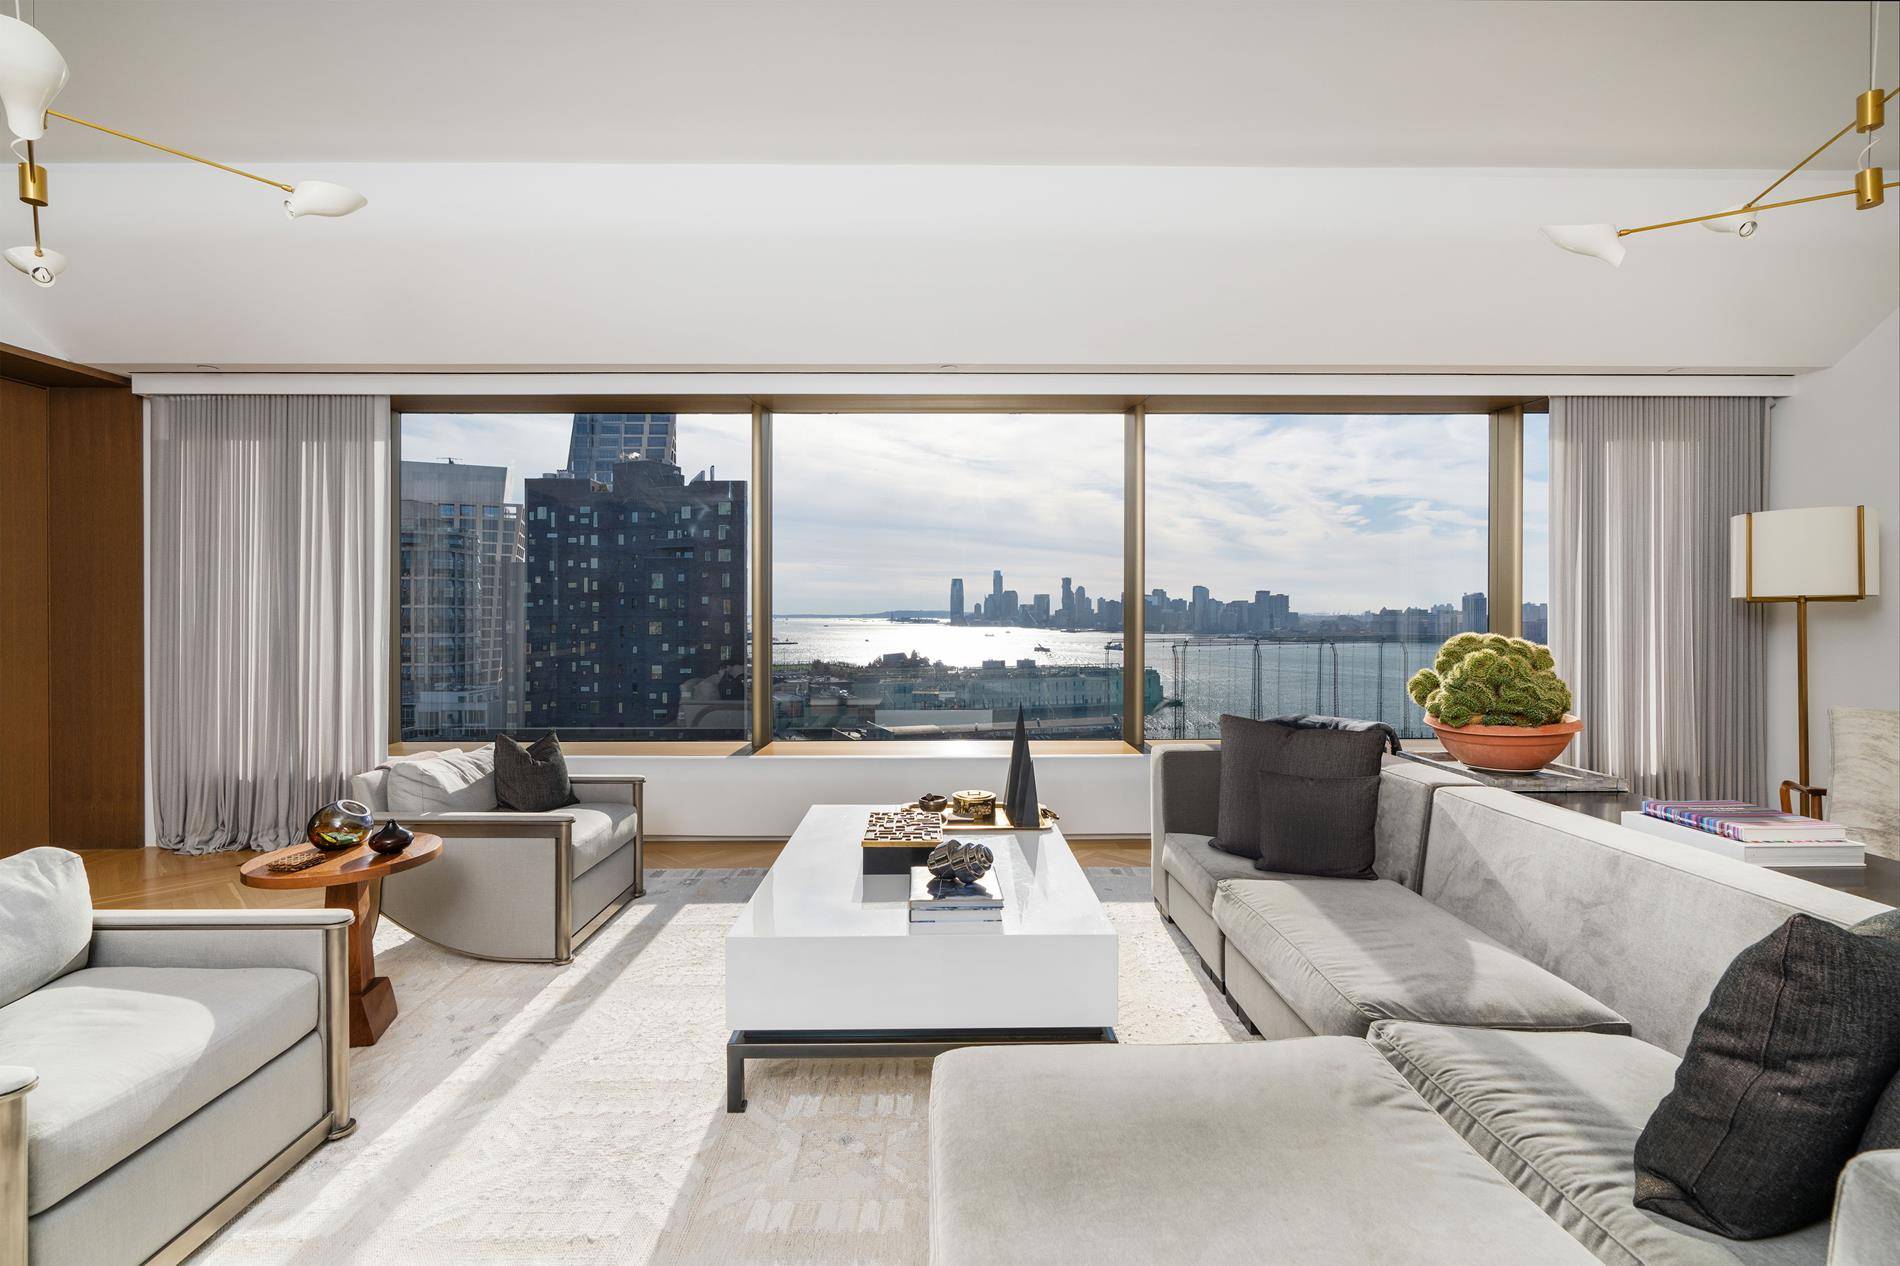 Introducing 551 West 21st Street 16B, a luxury turn key condo sprawling 3, 860 SF with 3 bedrooms, 3 full and 1 half bathrooms, private elevator entry, flex space, and ...